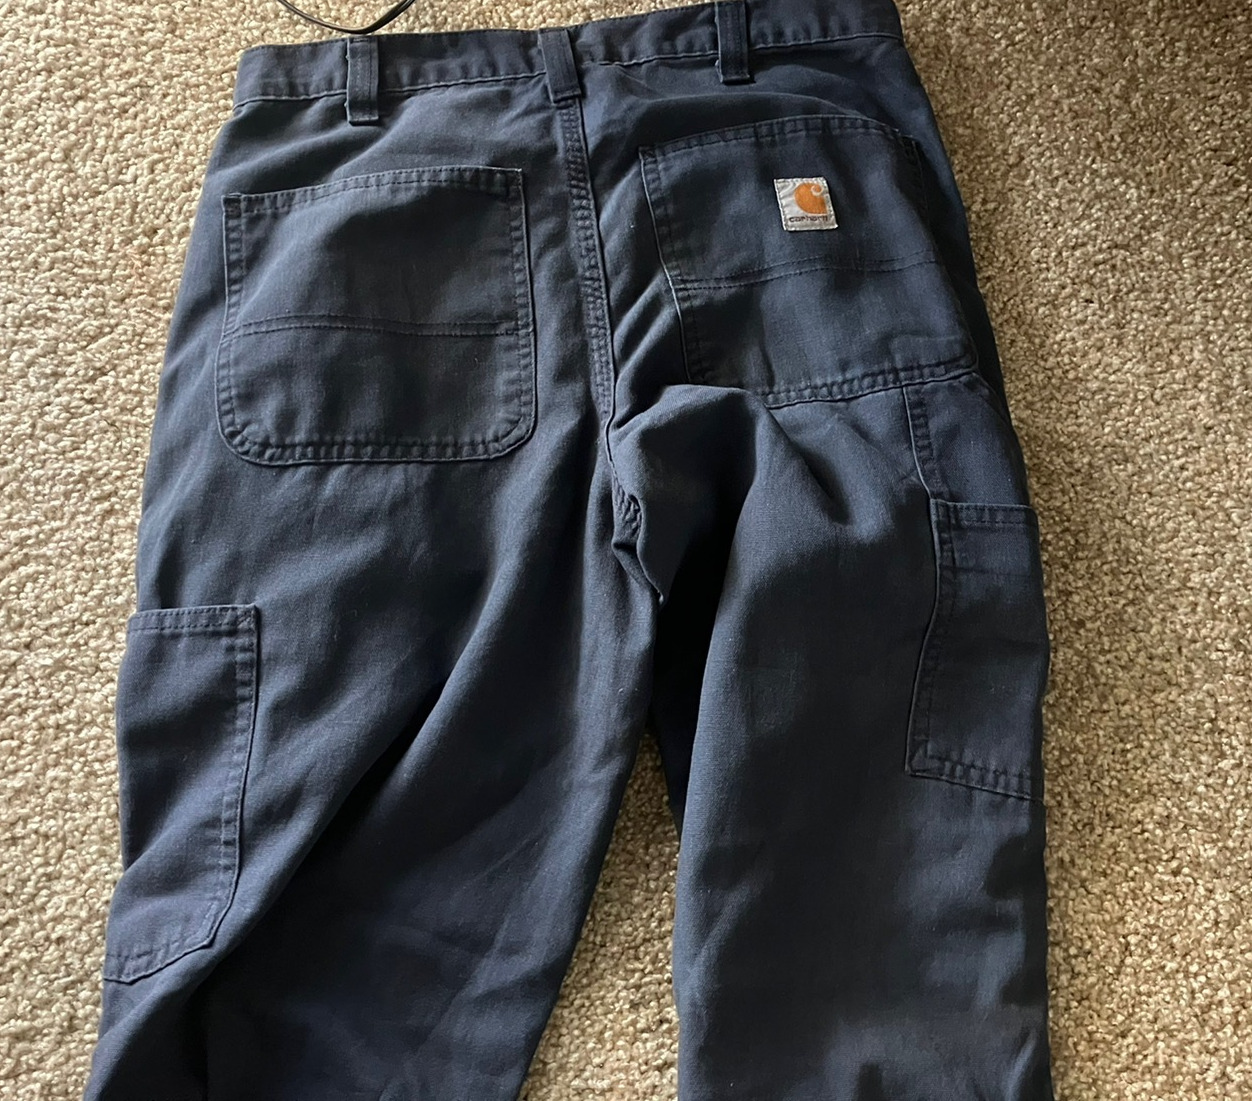 CARHARTT WORK PANTS - Great Condition - 